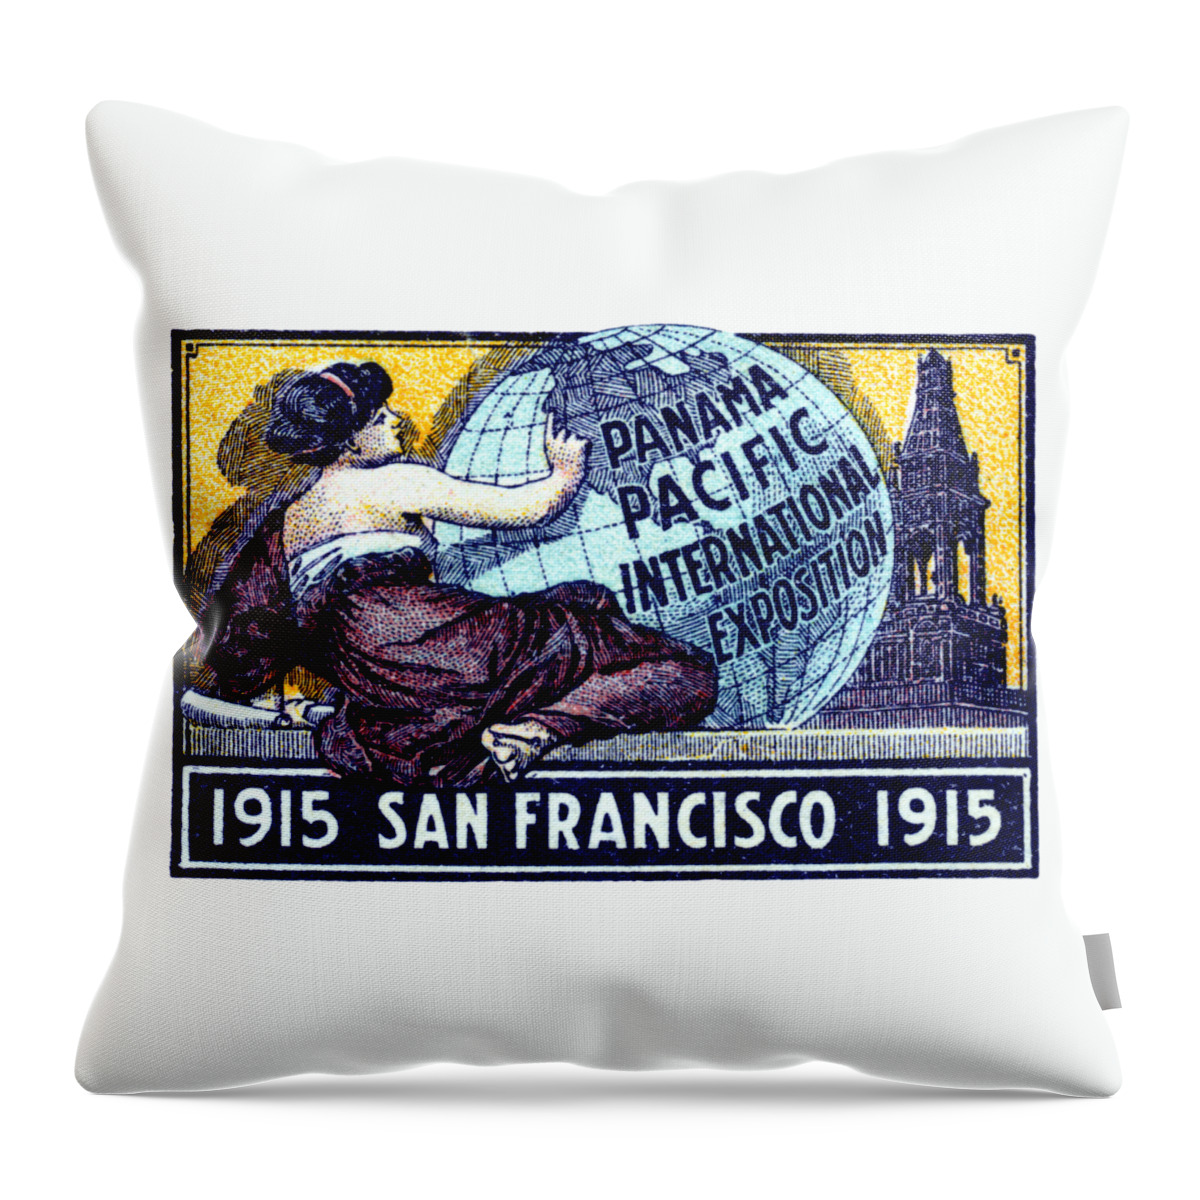 San Francisco Throw Pillow featuring the painting 1915 San Francisco Expo Poster by Historic Image